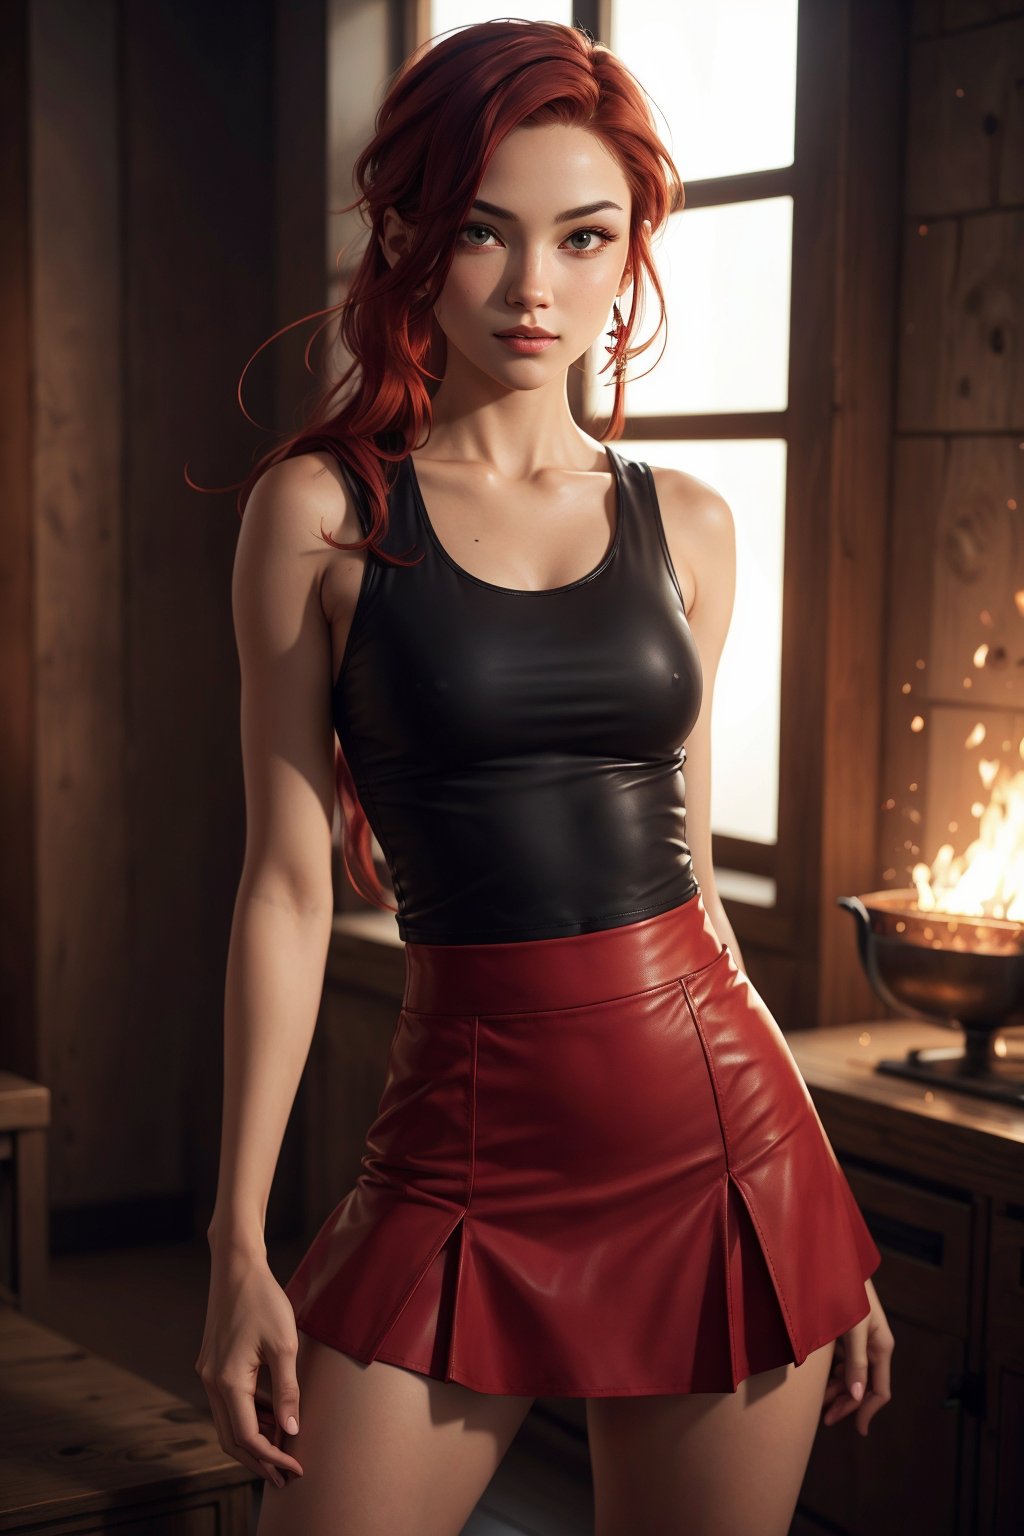 modern firebender with long black and red hair. Short skirt, leather tank top